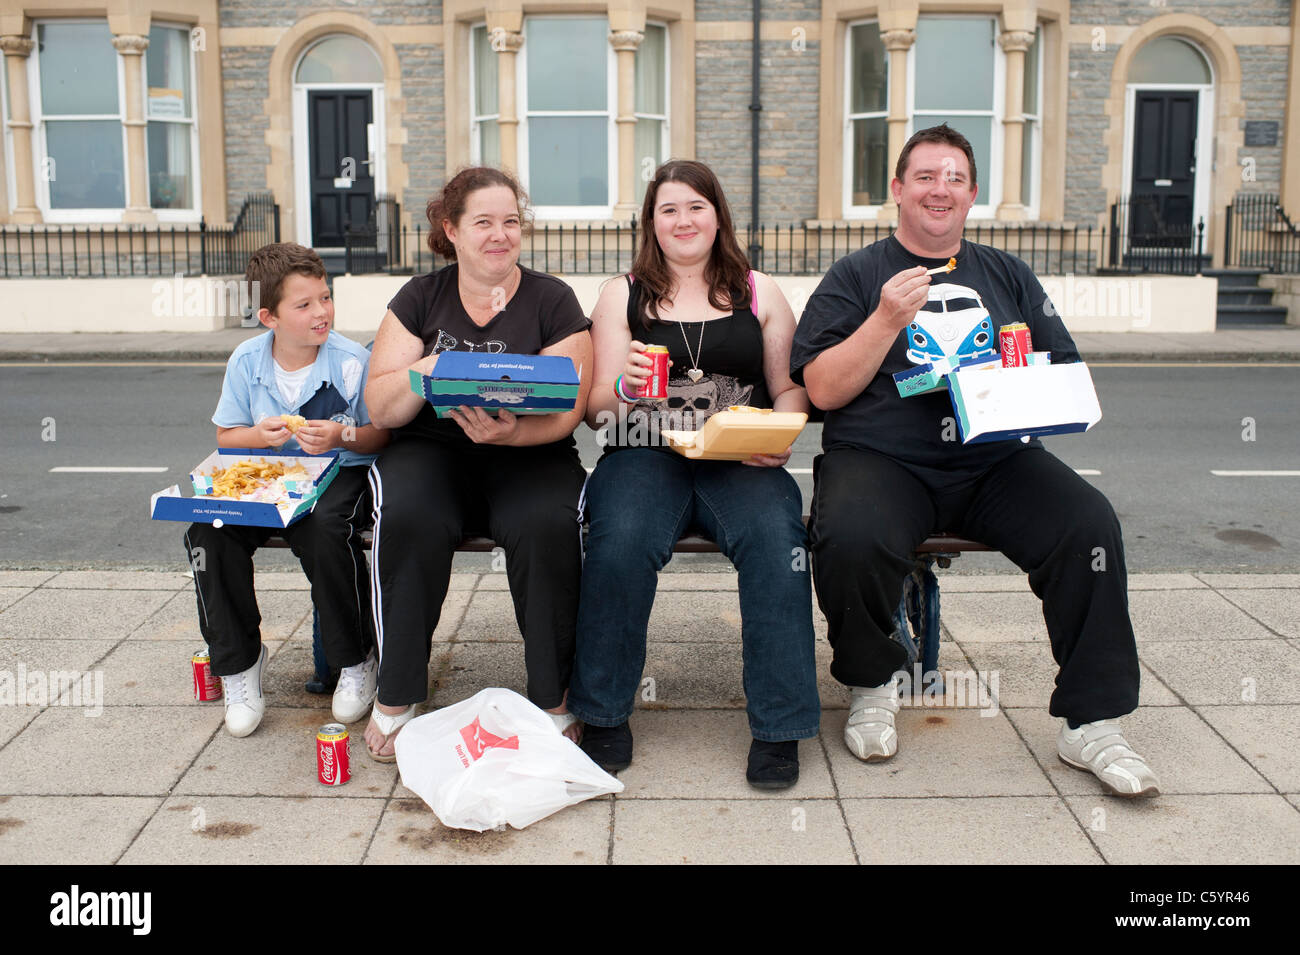 a family - mother, father, daughter, son, eating fish and chips, sitting on a bench, uk Stock Photo